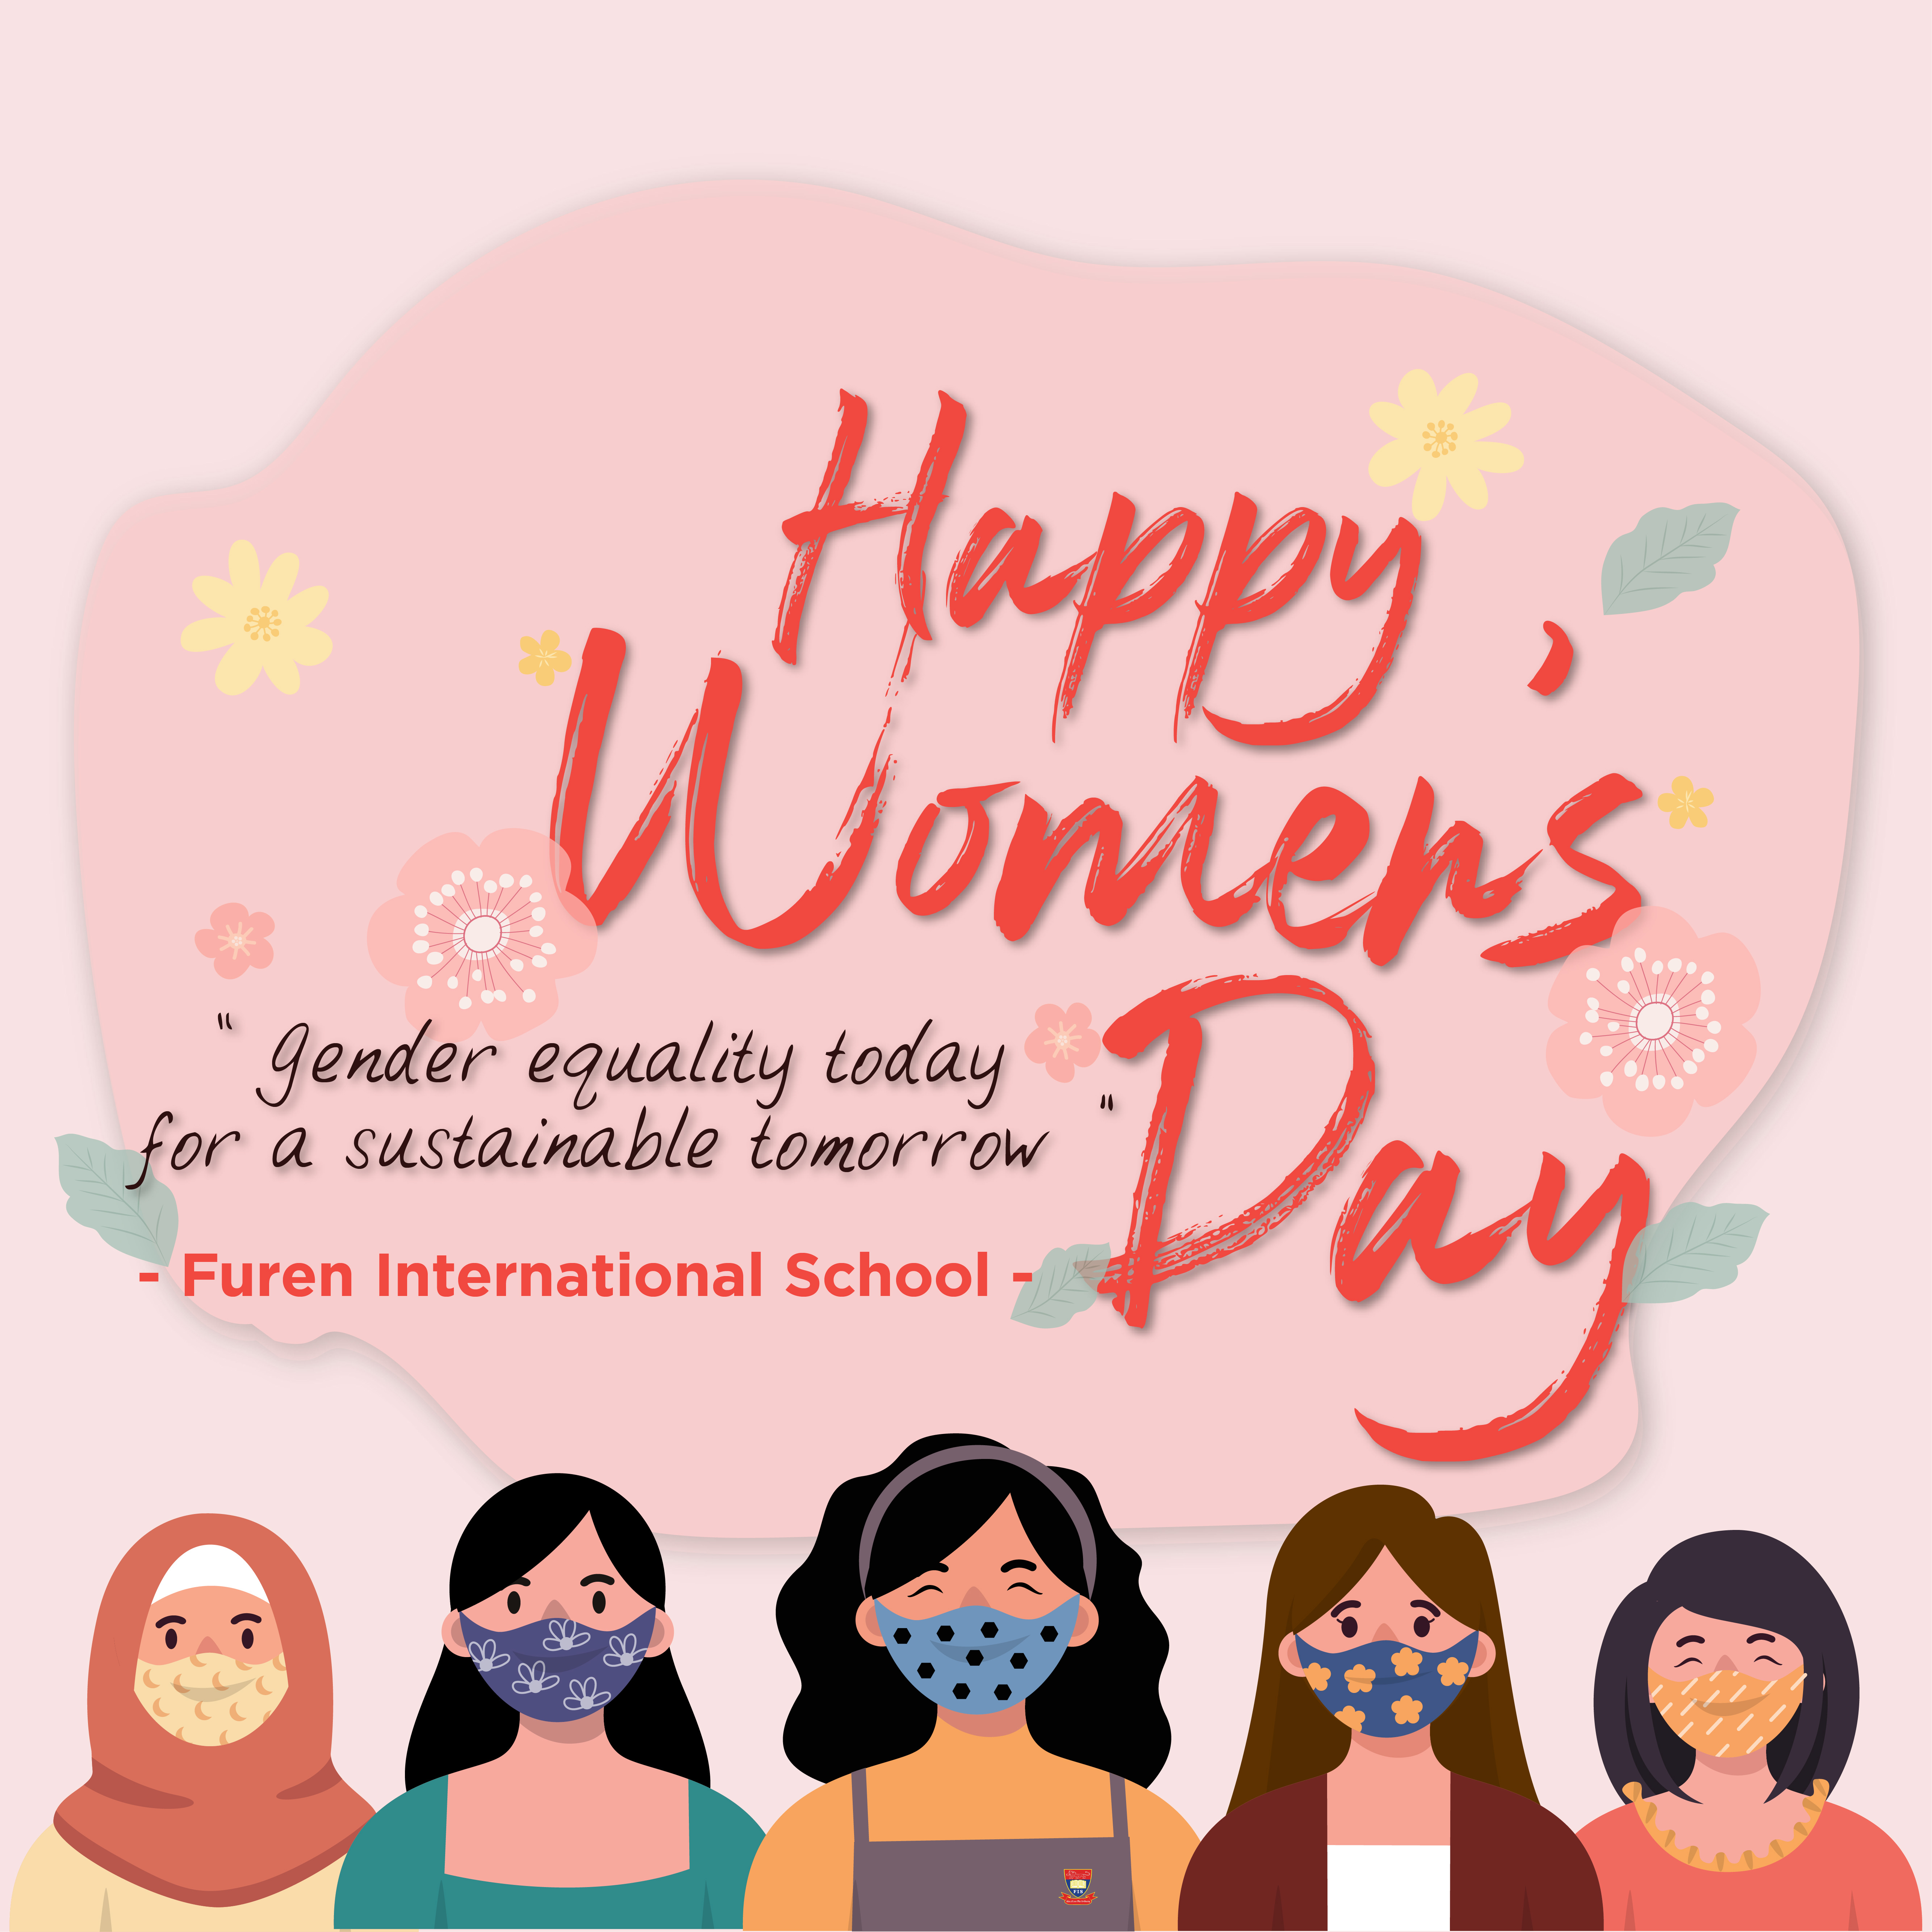 Happy Women’s Day to all the incredible women!